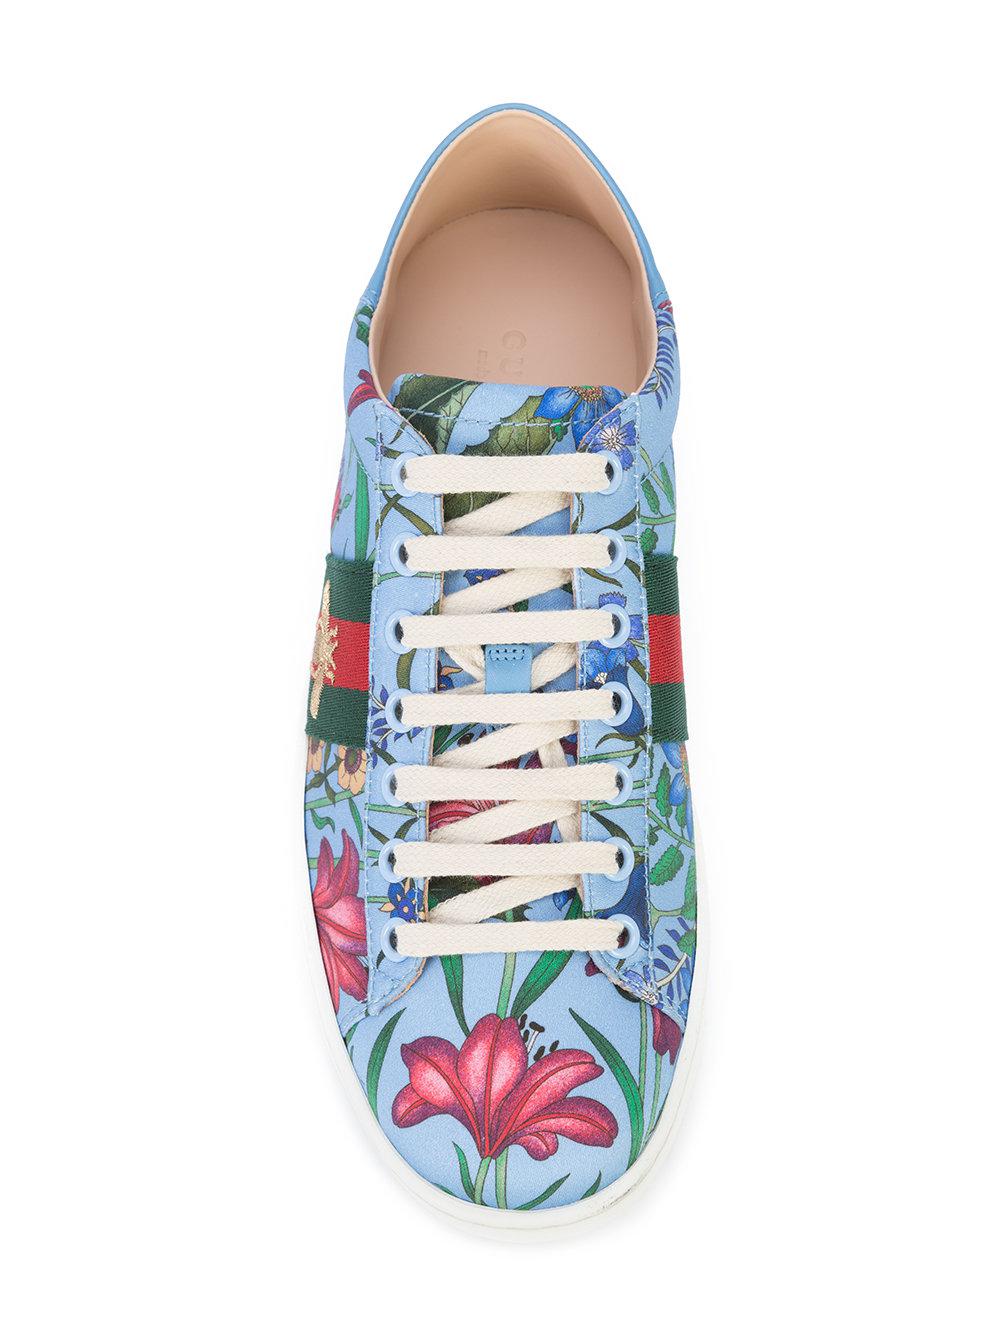 Gucci Ace New Floral Print Sneakers in Blue | Lyst